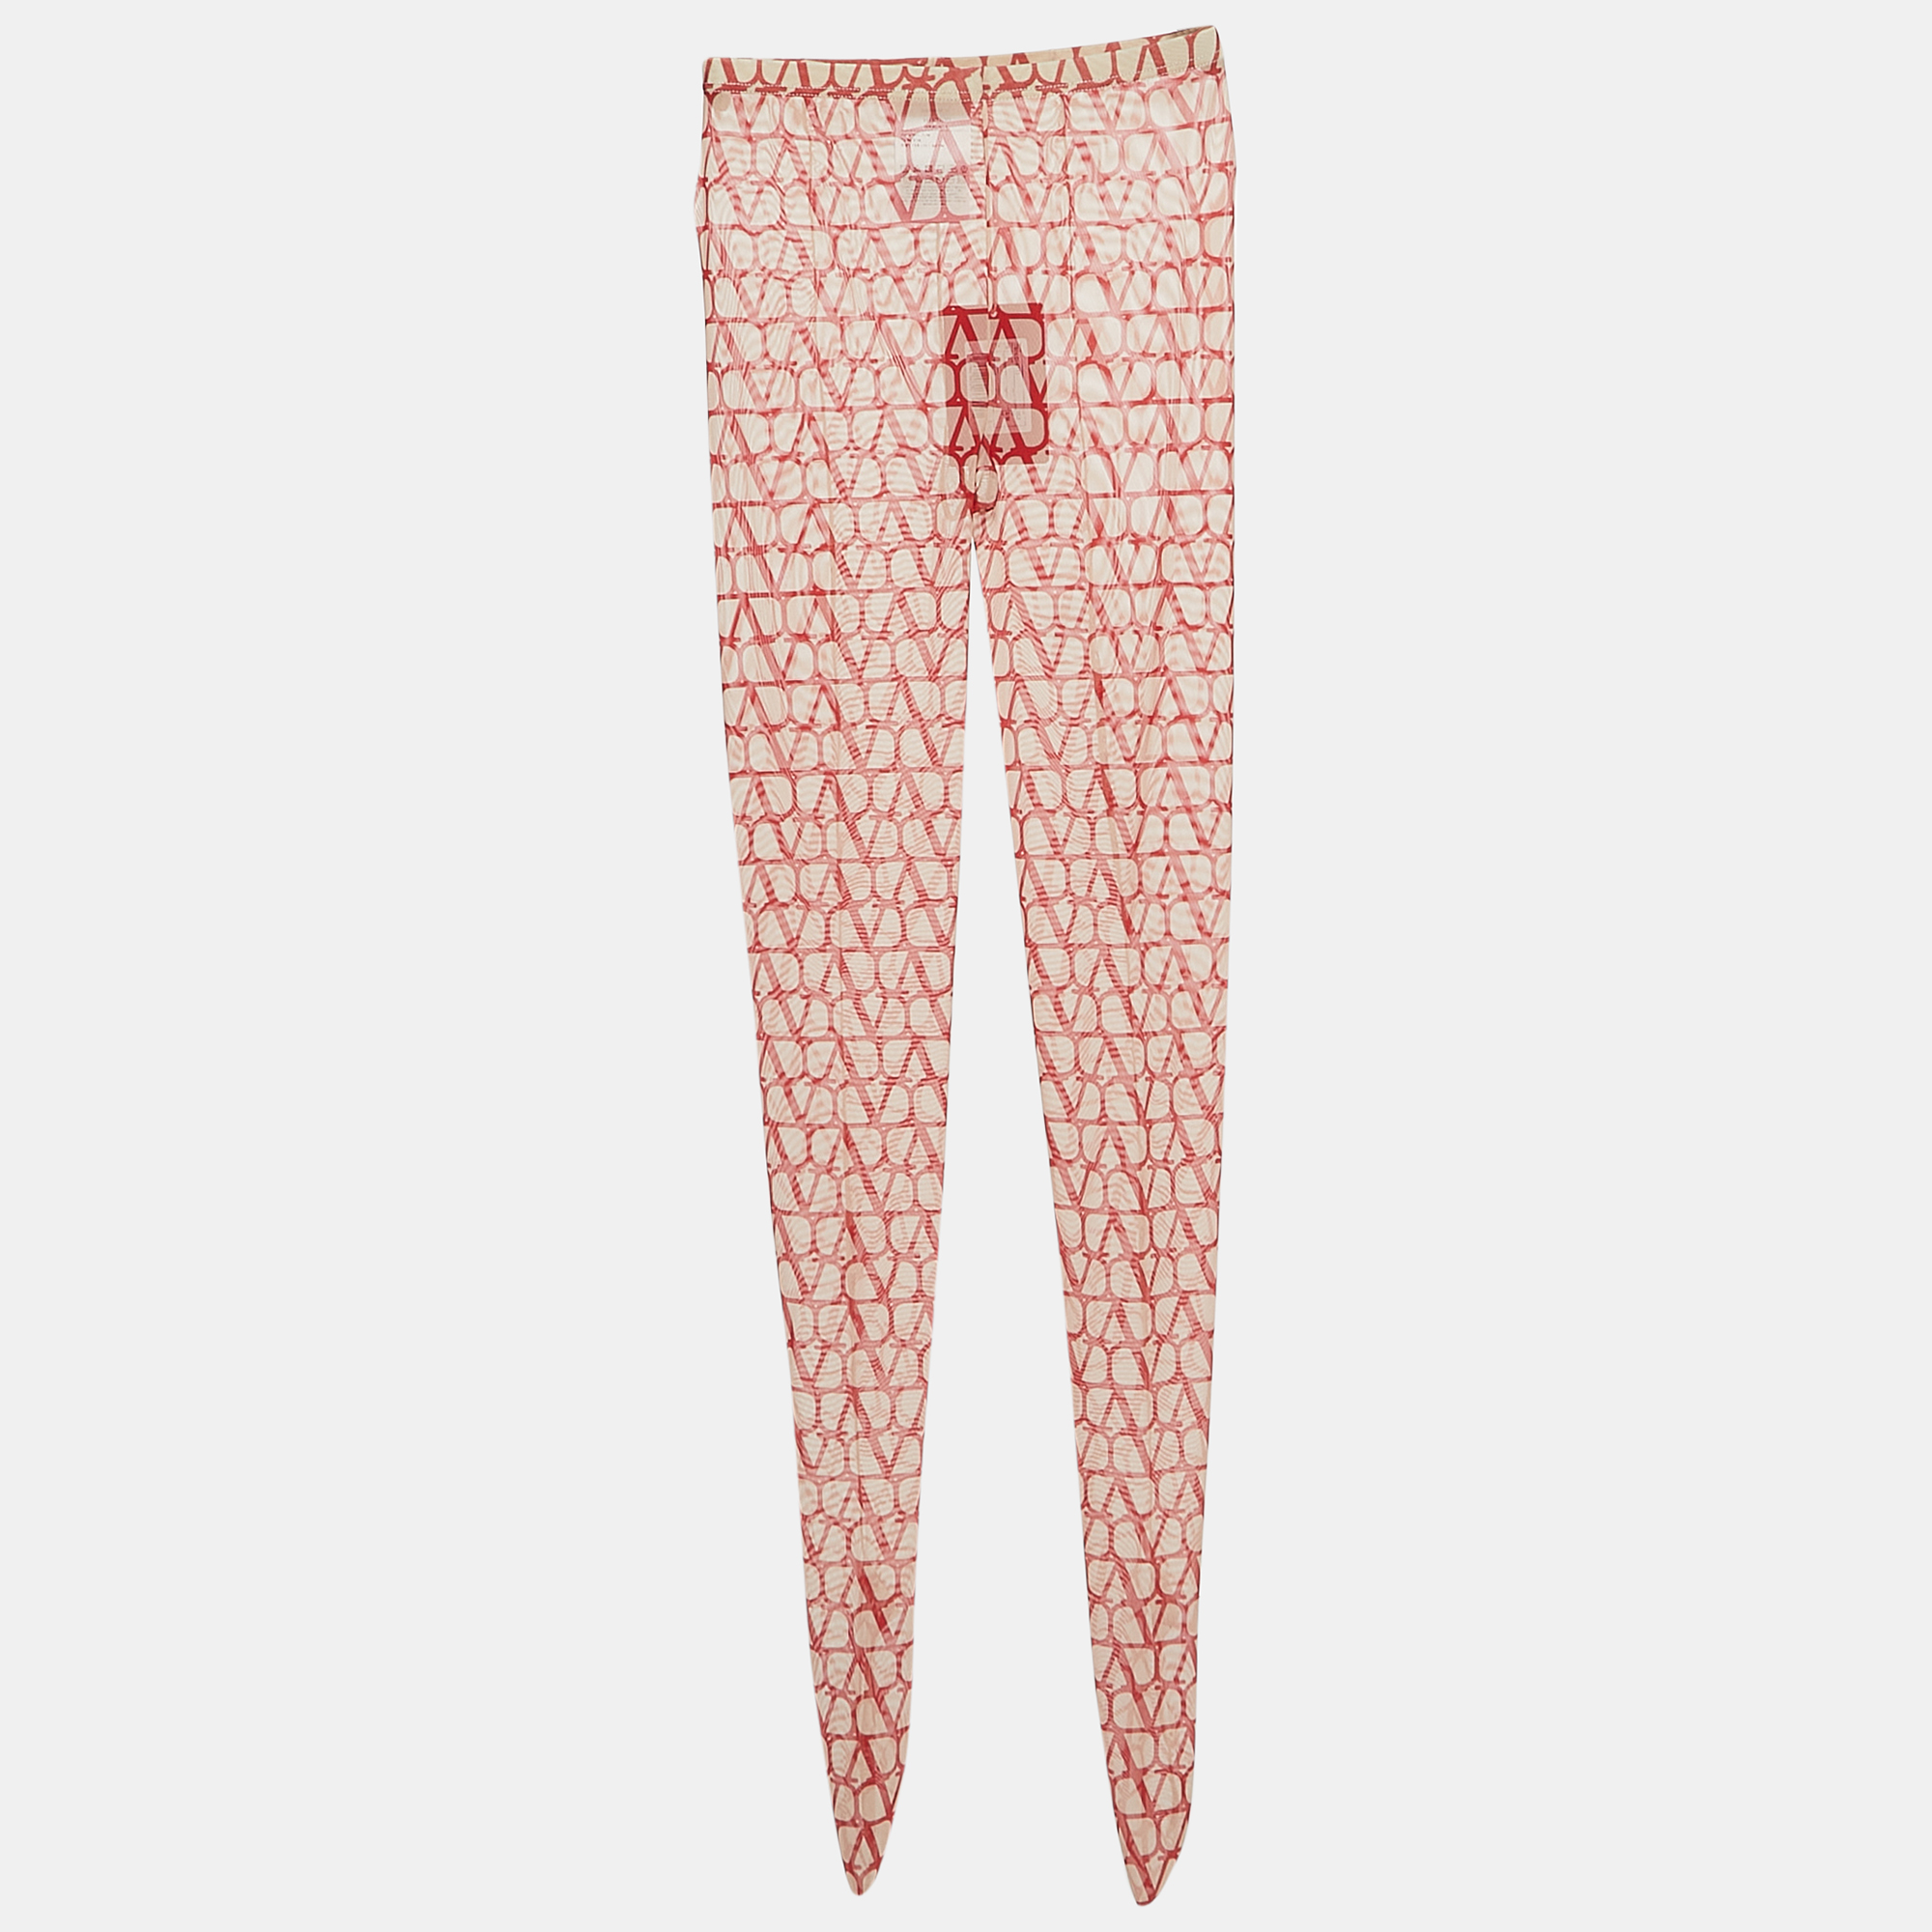 Valentino red logo patterned semi-sheer stretch tulle tights s/m